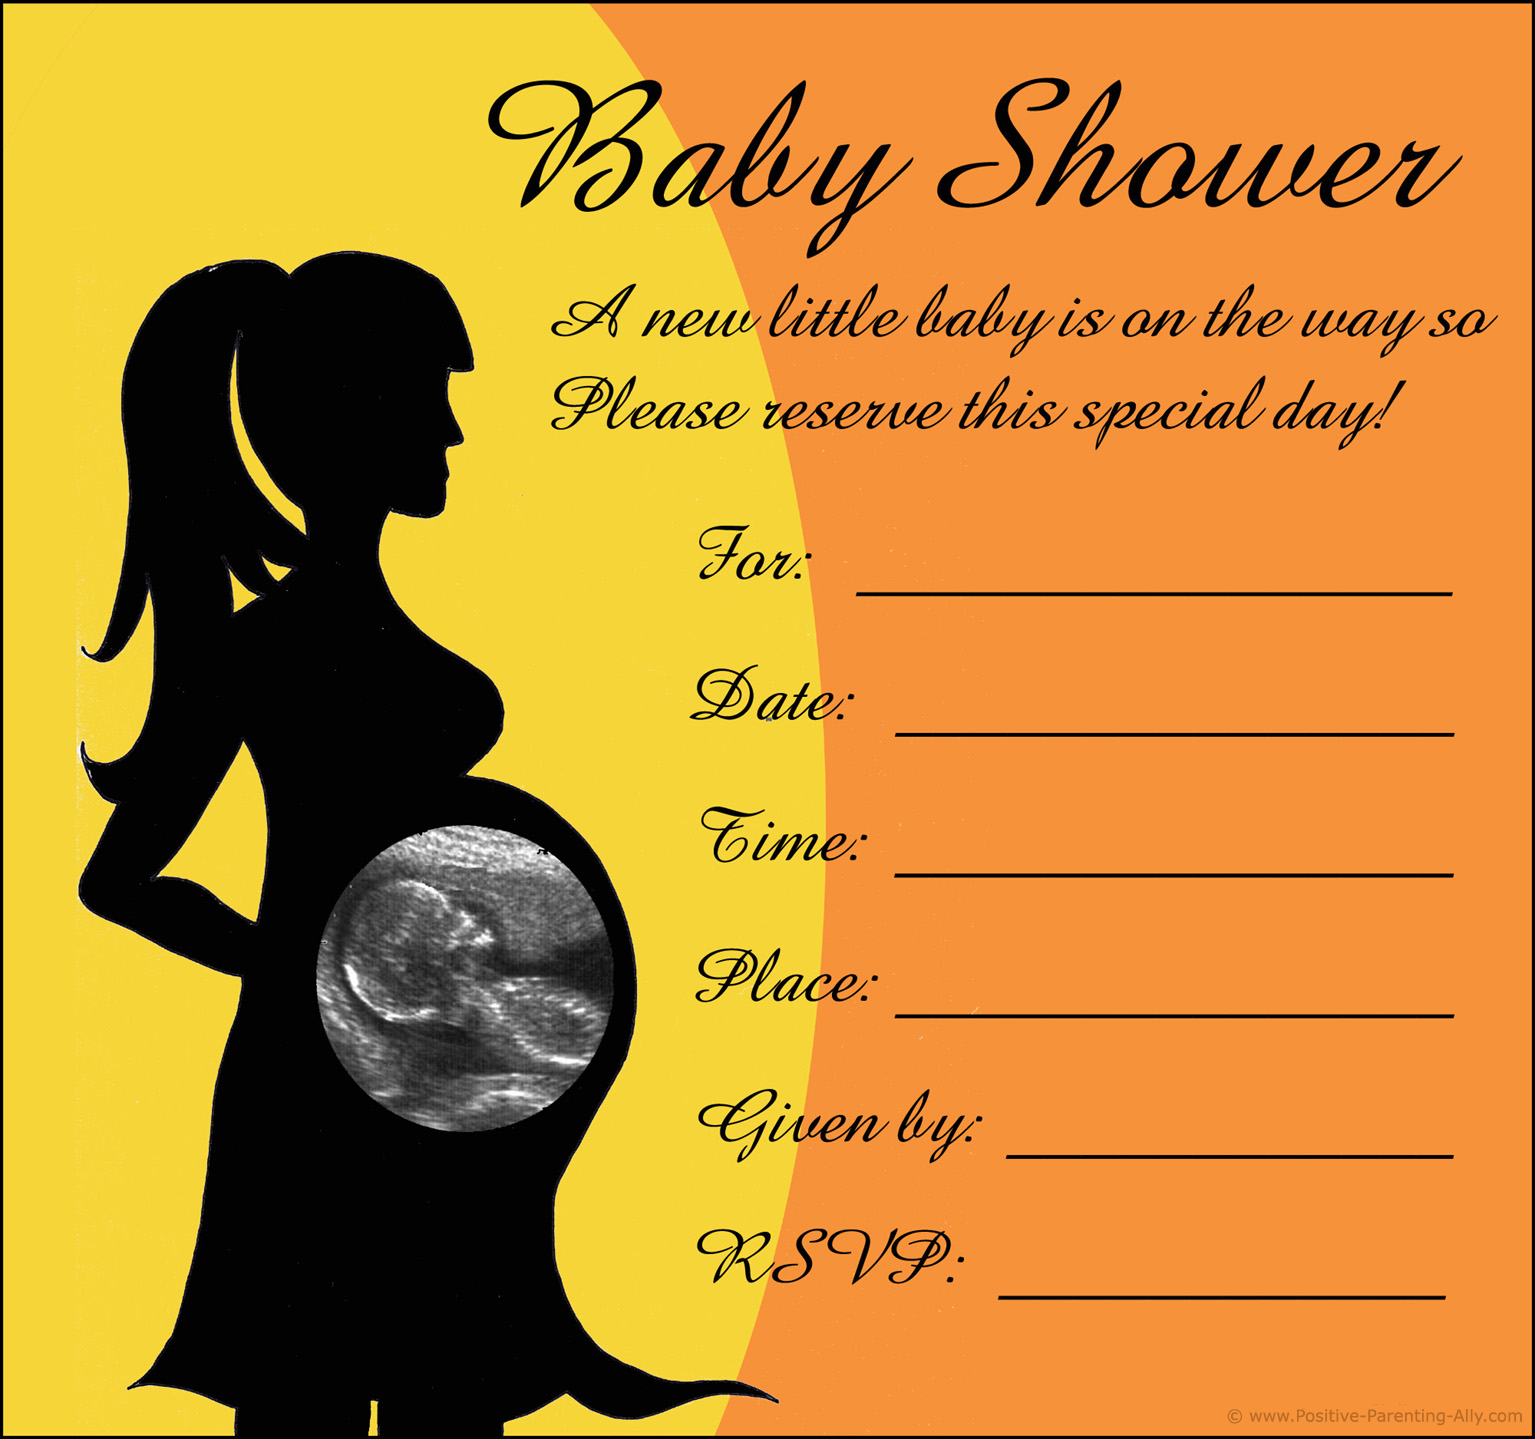 Invite with ultrasound image on pregnant belly silhouette.